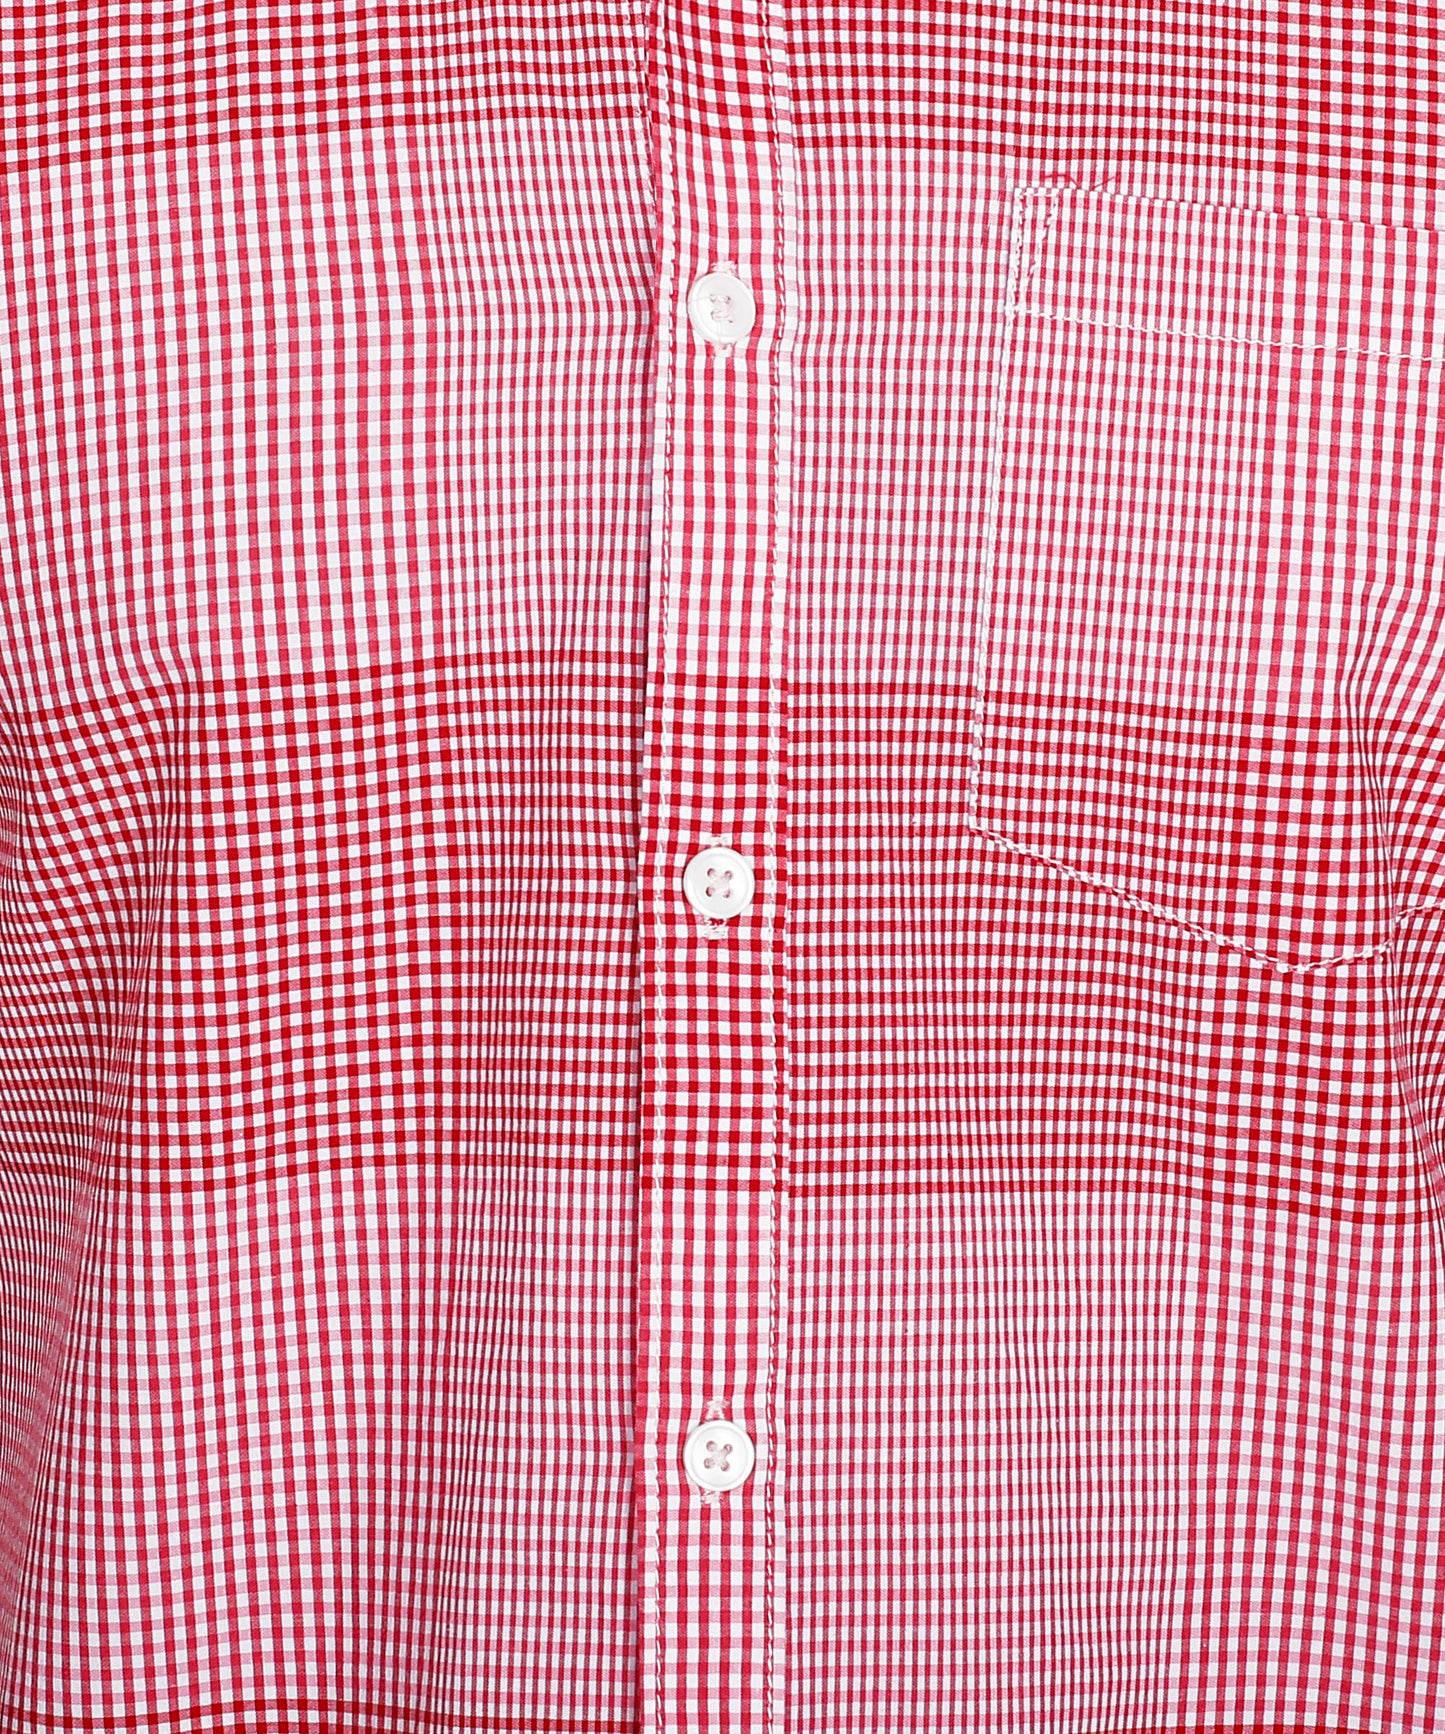 5thanfold Men's Formal Pure Cotton Full Sleeve Checkered Red Regular Fit Shirt